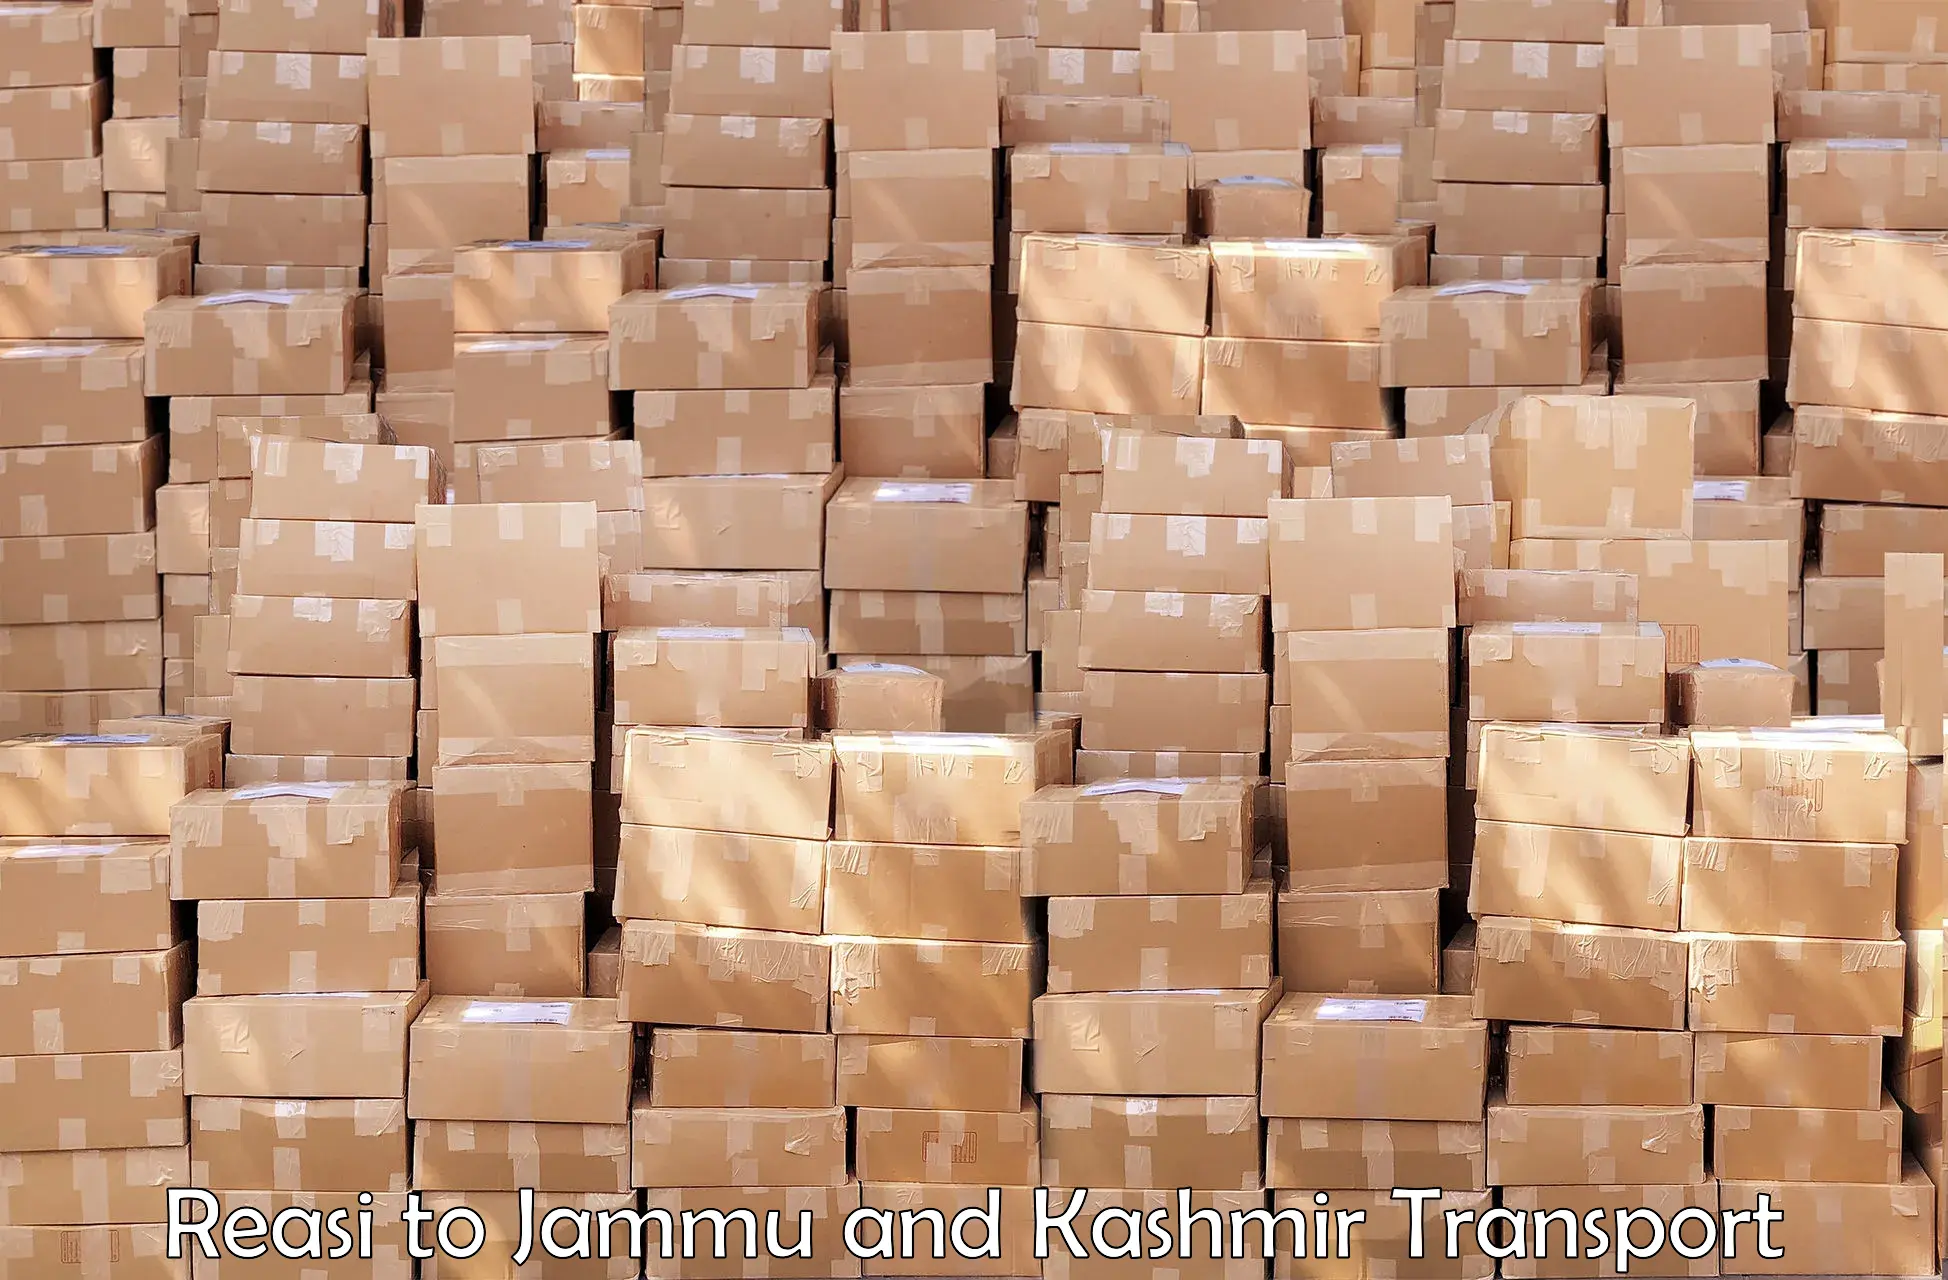 Vehicle courier services Reasi to Shopian